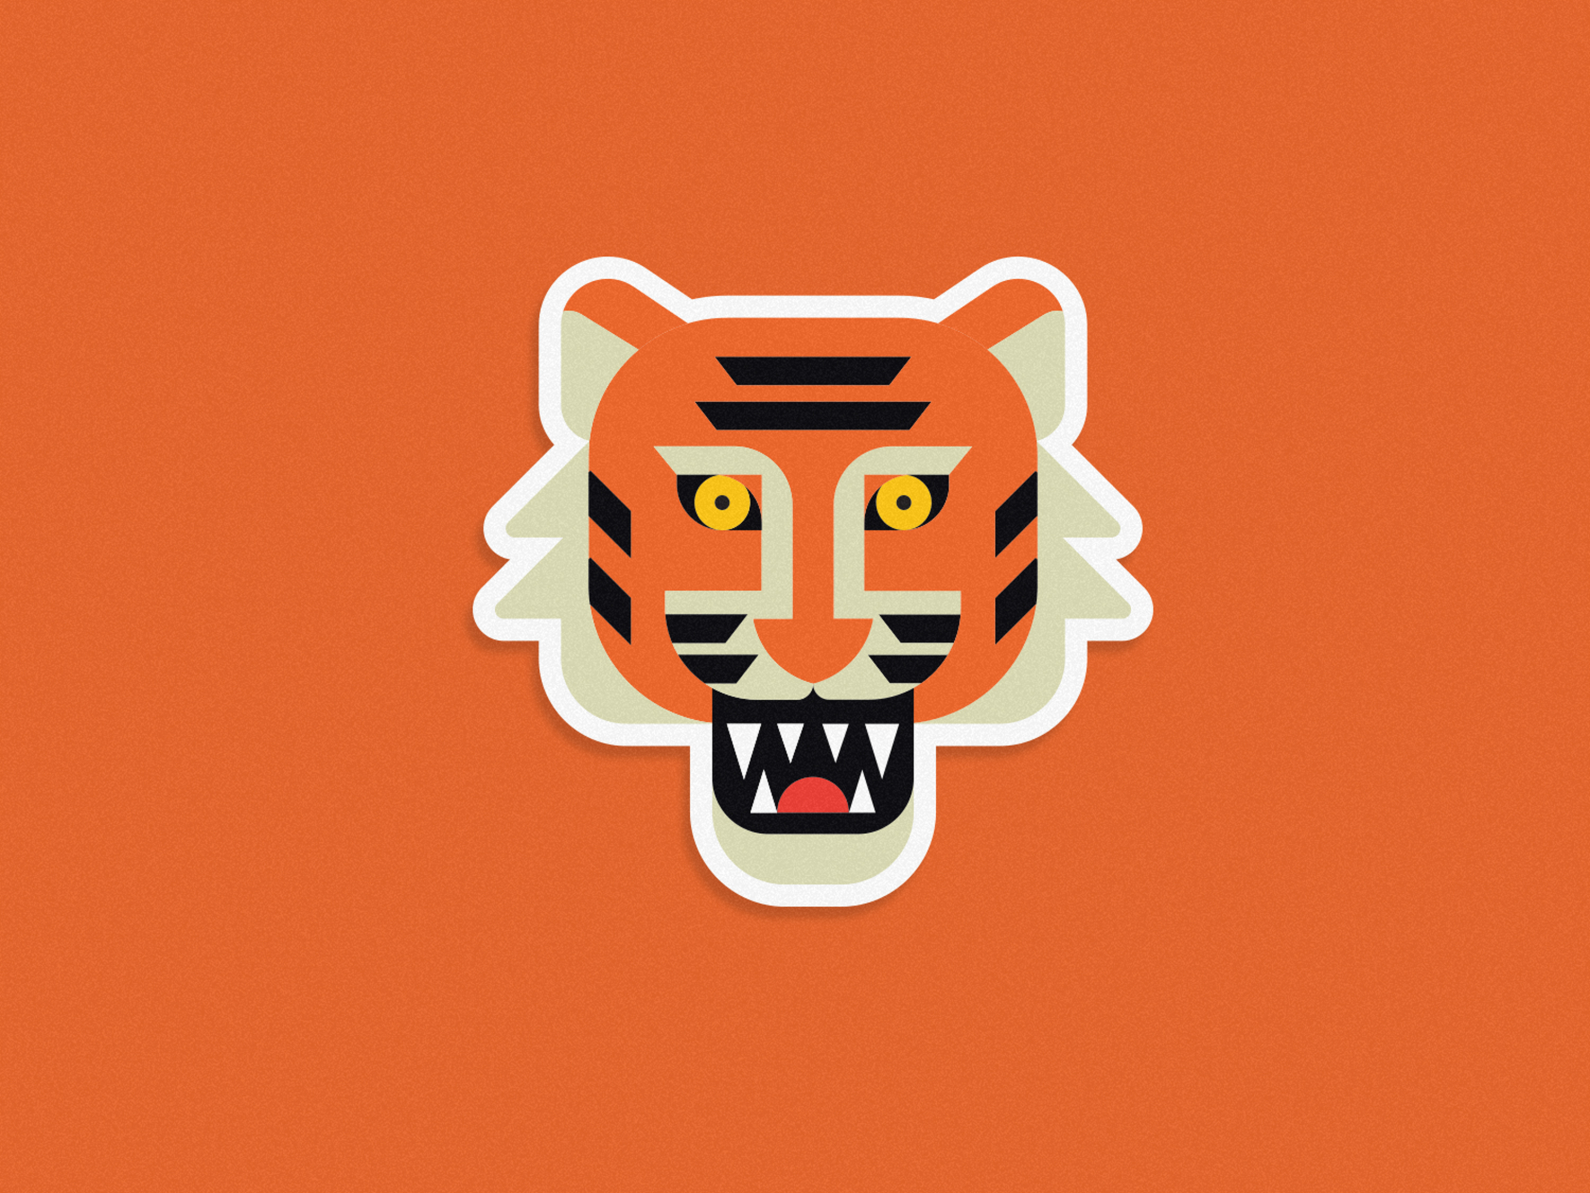 How To Design A Tiger by Caio Pires on Dribbble